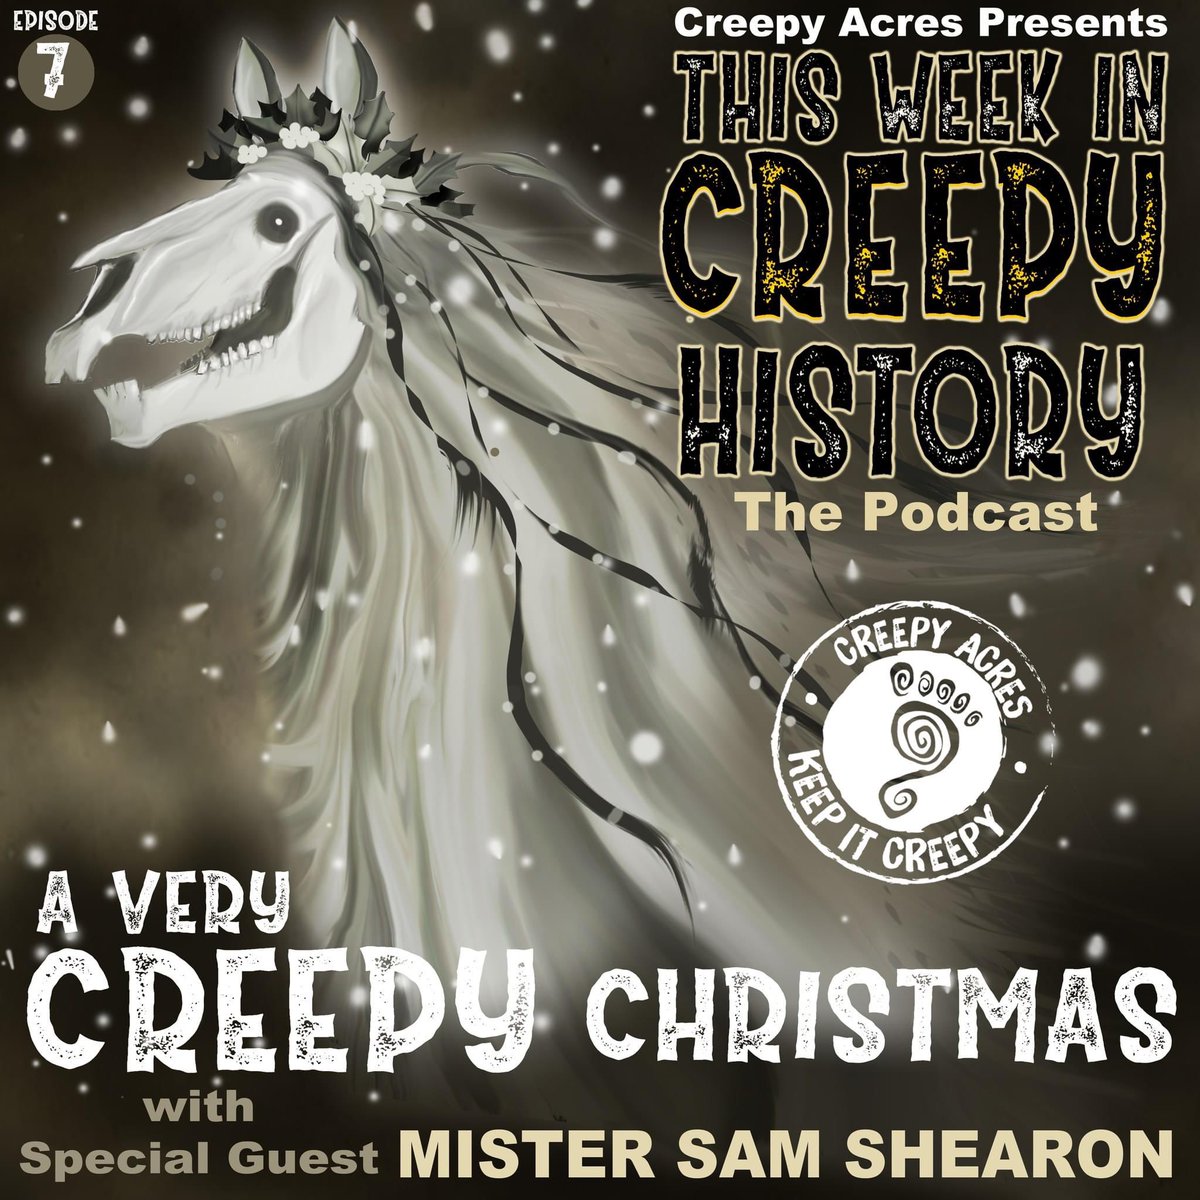 SURPRISE! It's a Cryptmas special just in time for Christmas! Join Laura Kram and Sam Squatch as they discuss the creepy characters that haunt Christmas time with the master of the macabre, Mister Sam Shearon! 

Available wherever you find podcasts! 
#cryptid #christmas #podcast